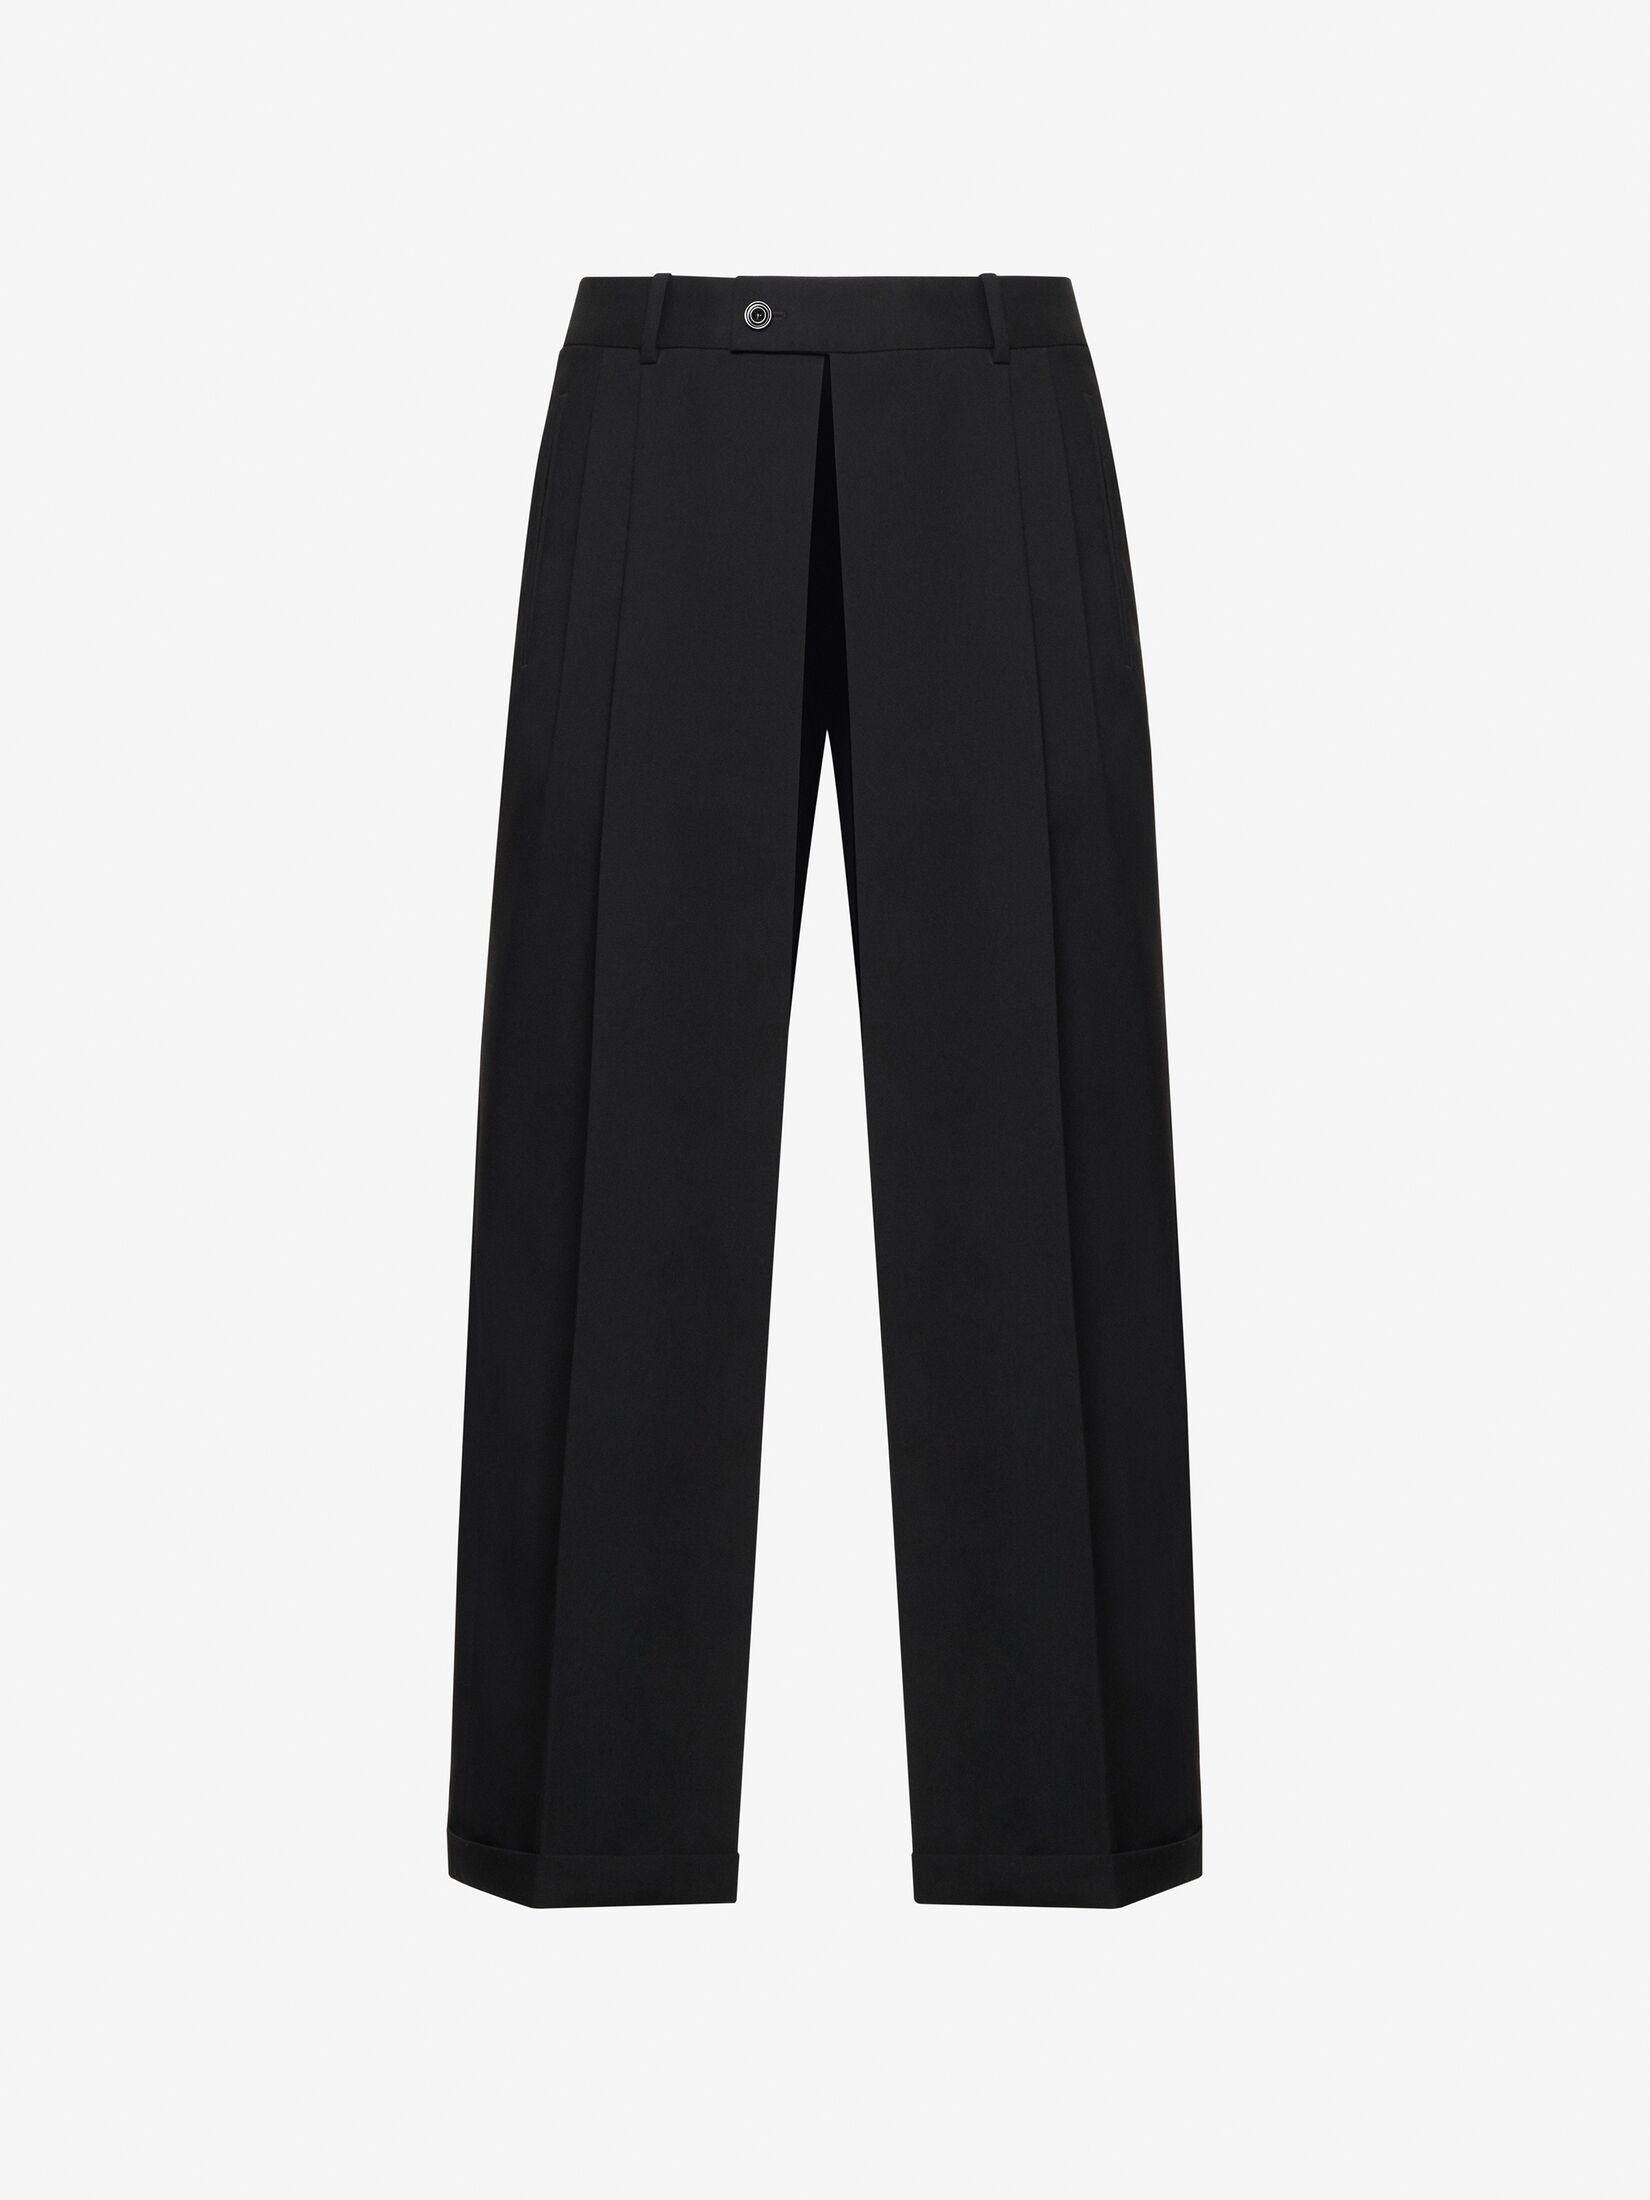 Men's Slashed Tailored Trousers in Black - 1